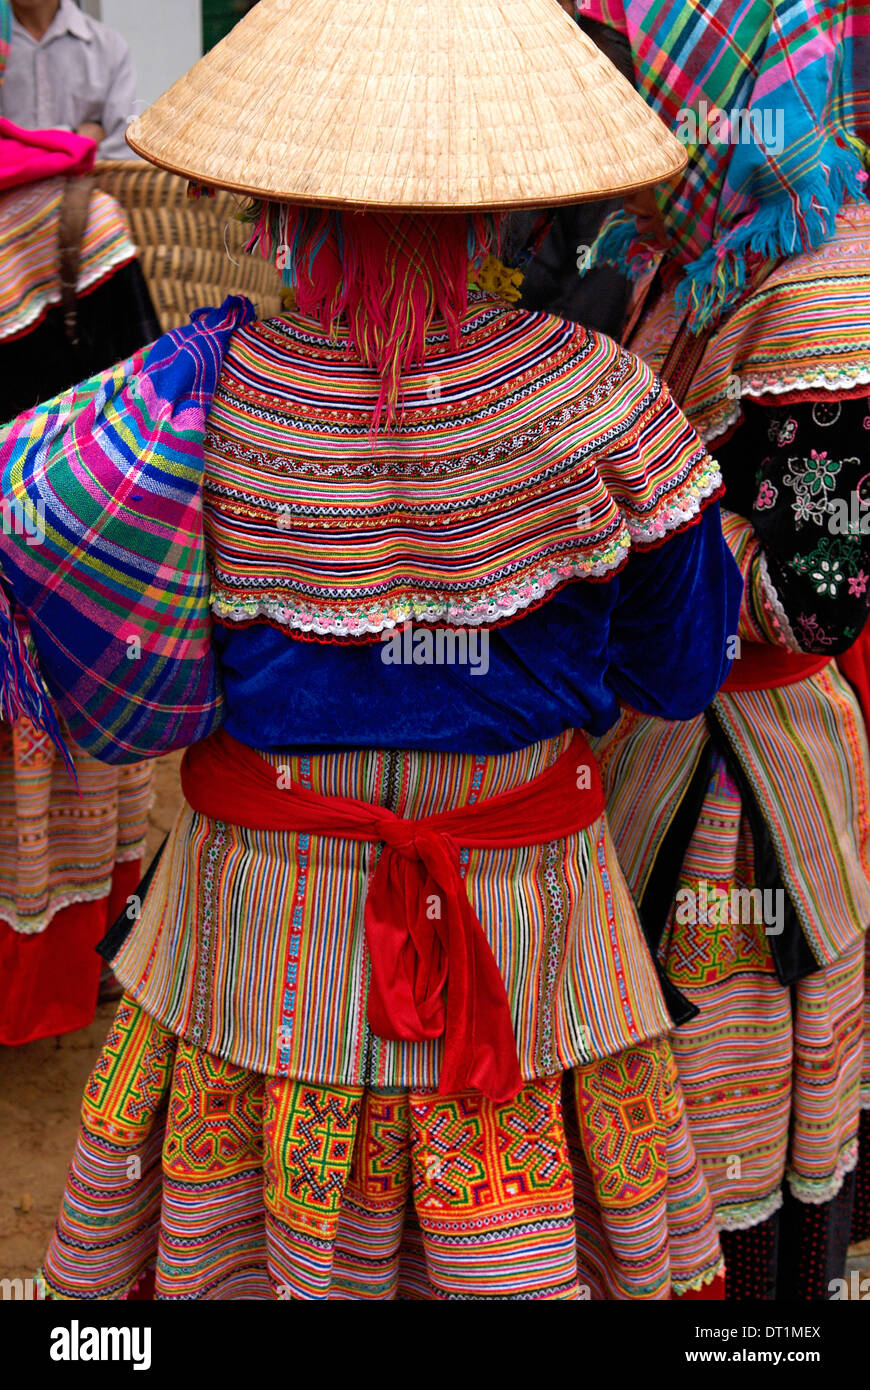 Flower Hmong ethnic group at Can Cau market, Bac Ha area, Vietnam, Indochina, Southeast Asia, Asia Stock Photo